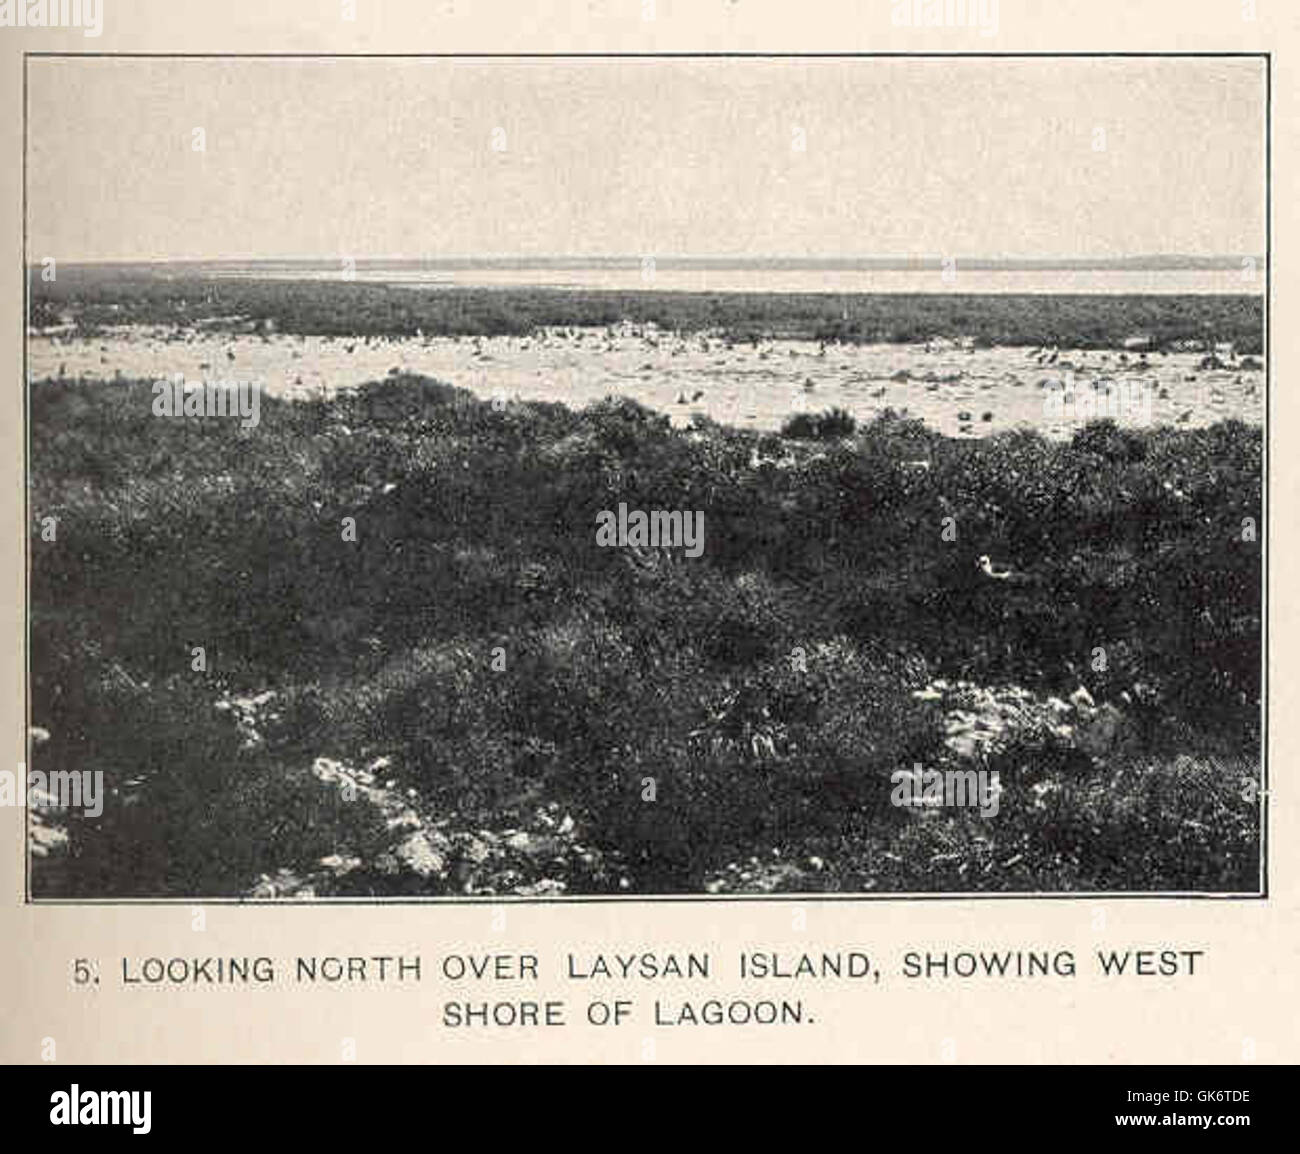 42769 Looking North over Laysan Island, showing west shore of lagoon Stock Photo